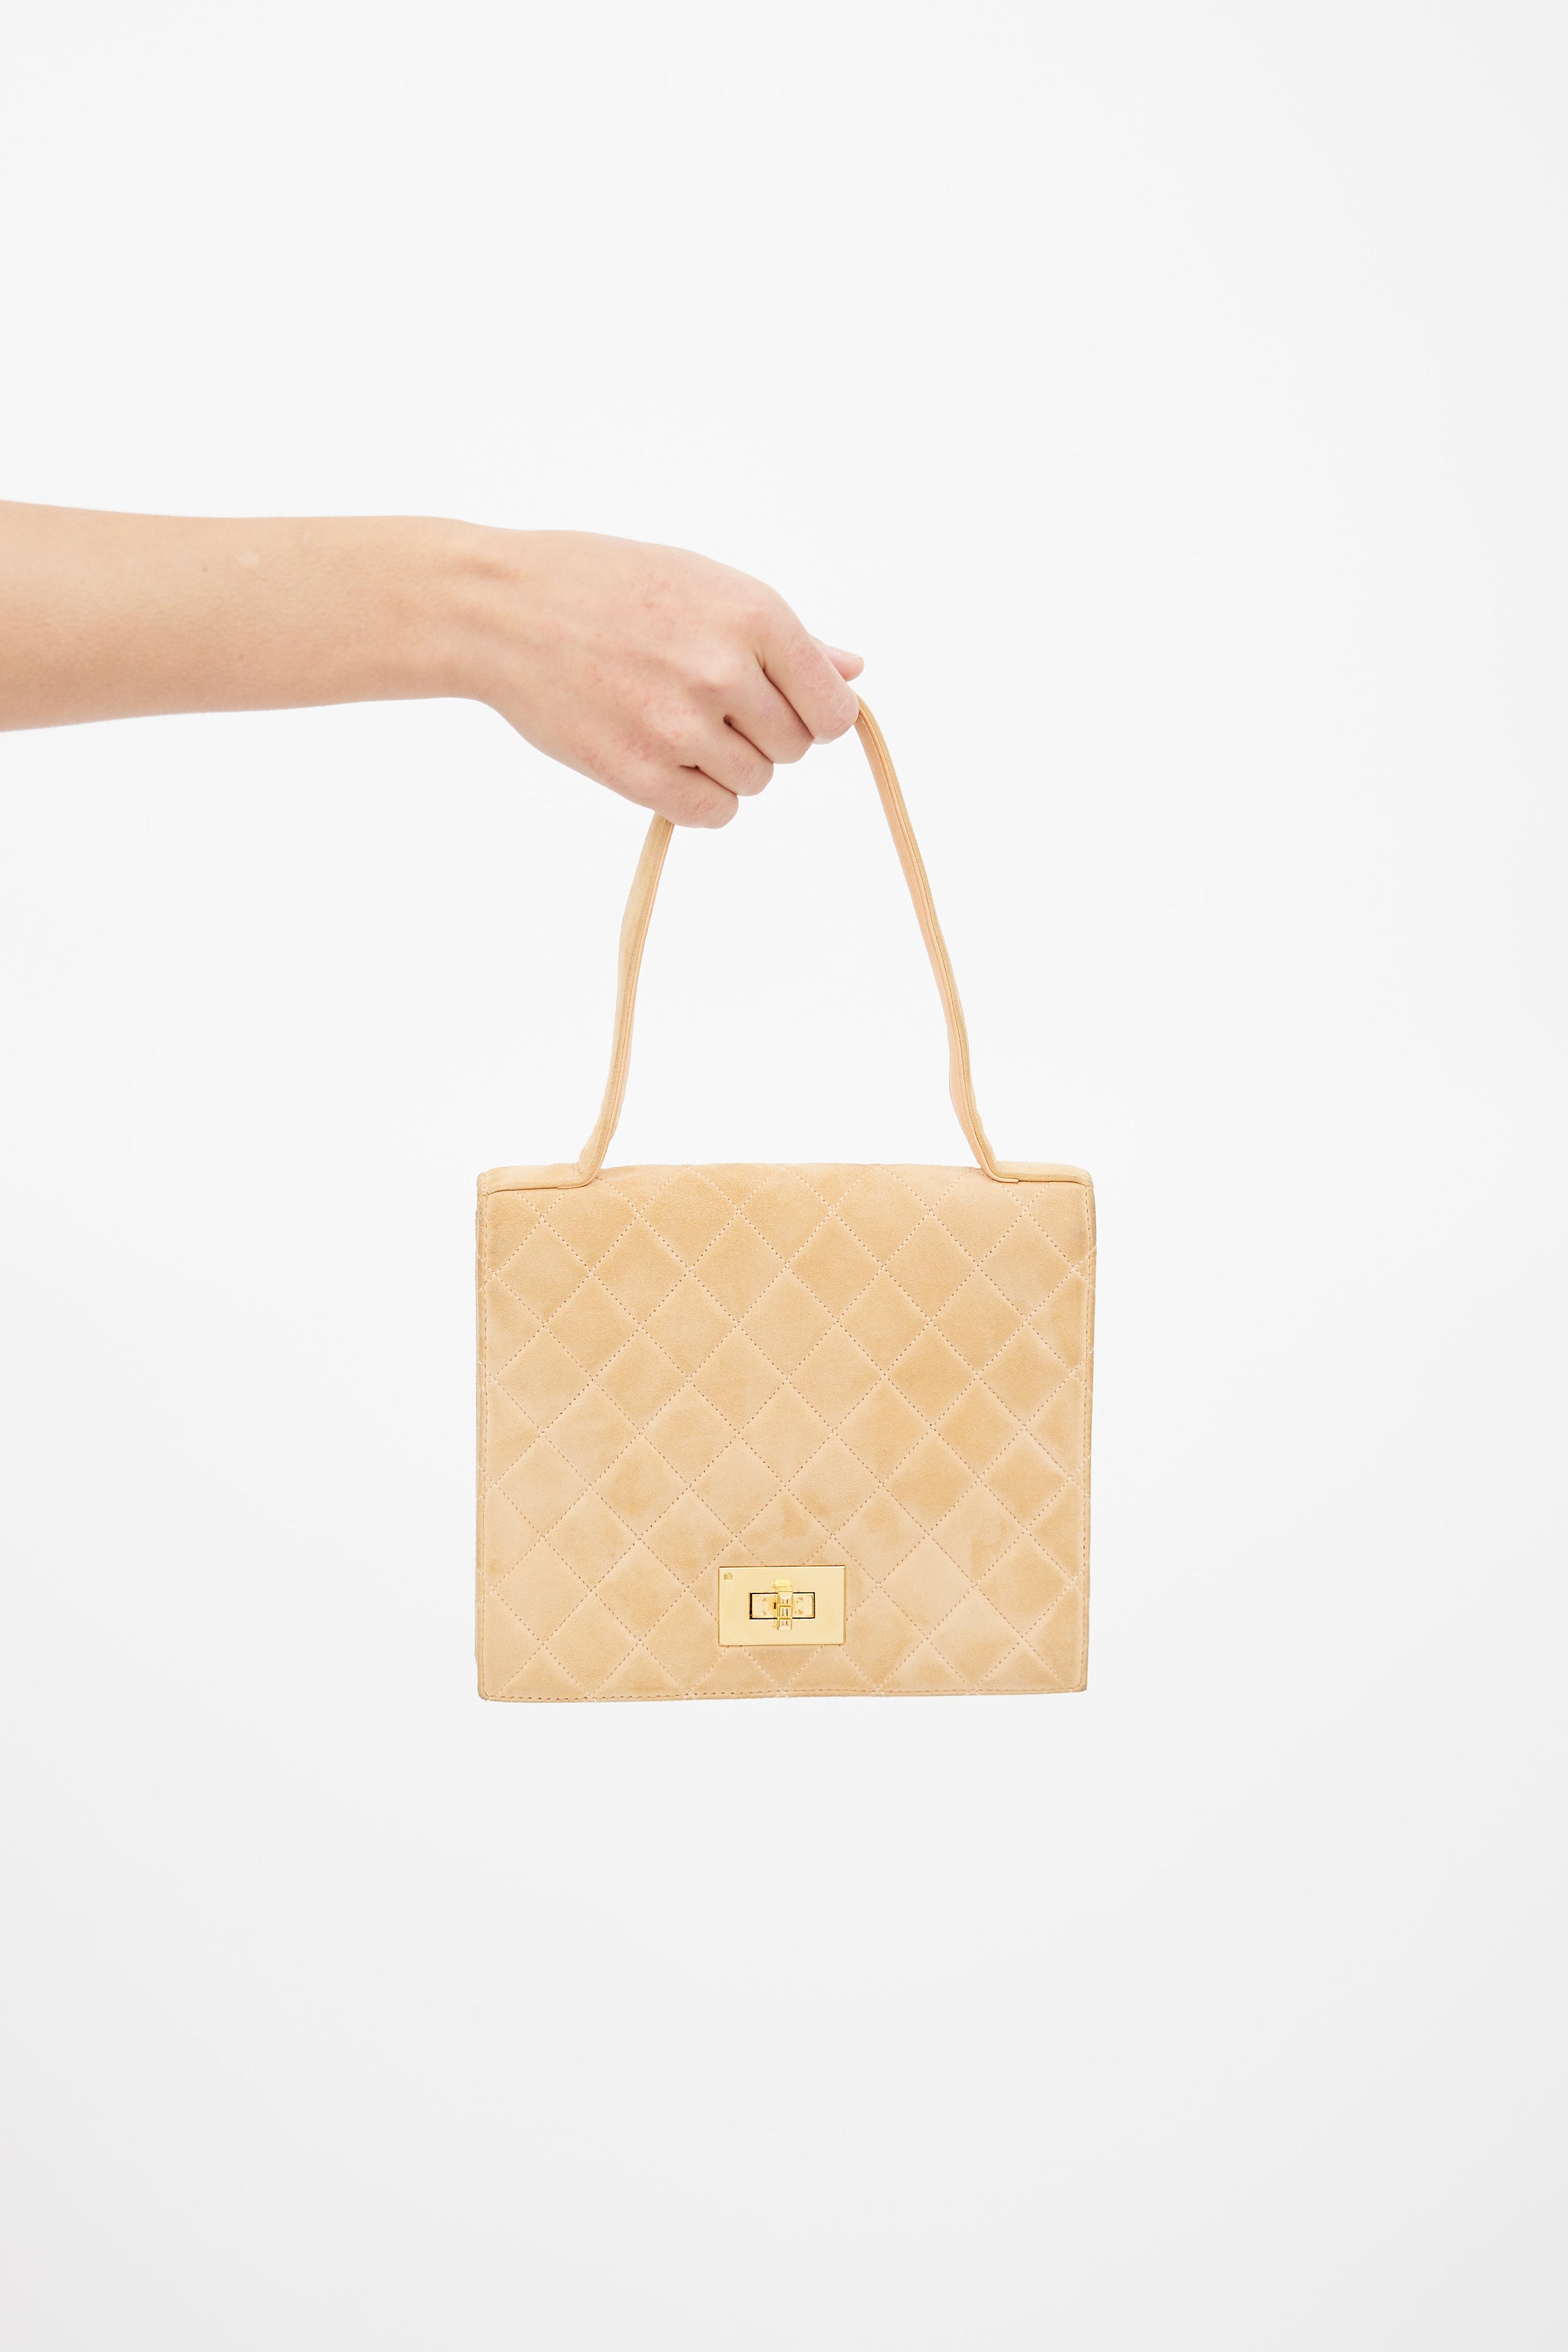 Treasures of NYC - Chanel Tan Quilted Chain Shoulder Bag